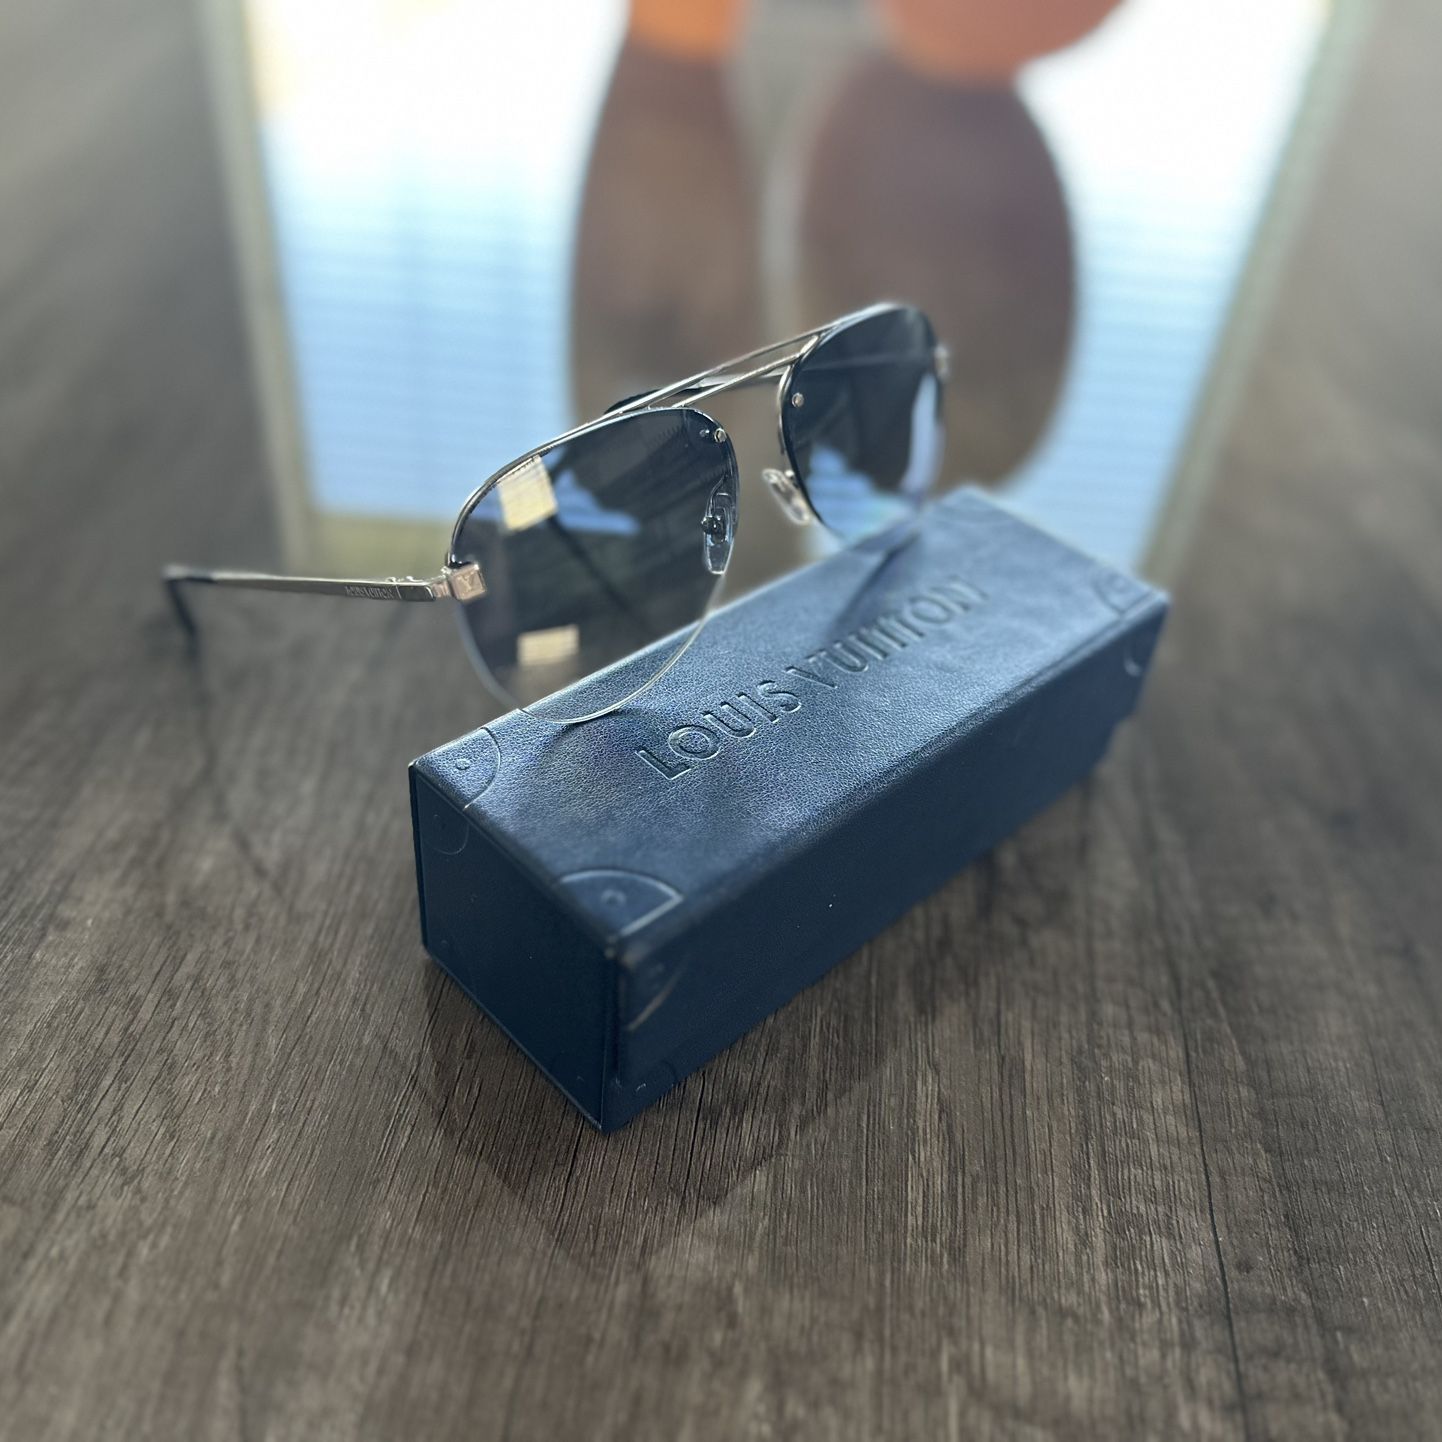 Louis Vuitton Clockwise Sunglasses. for Sale in Washington, DC - OfferUp